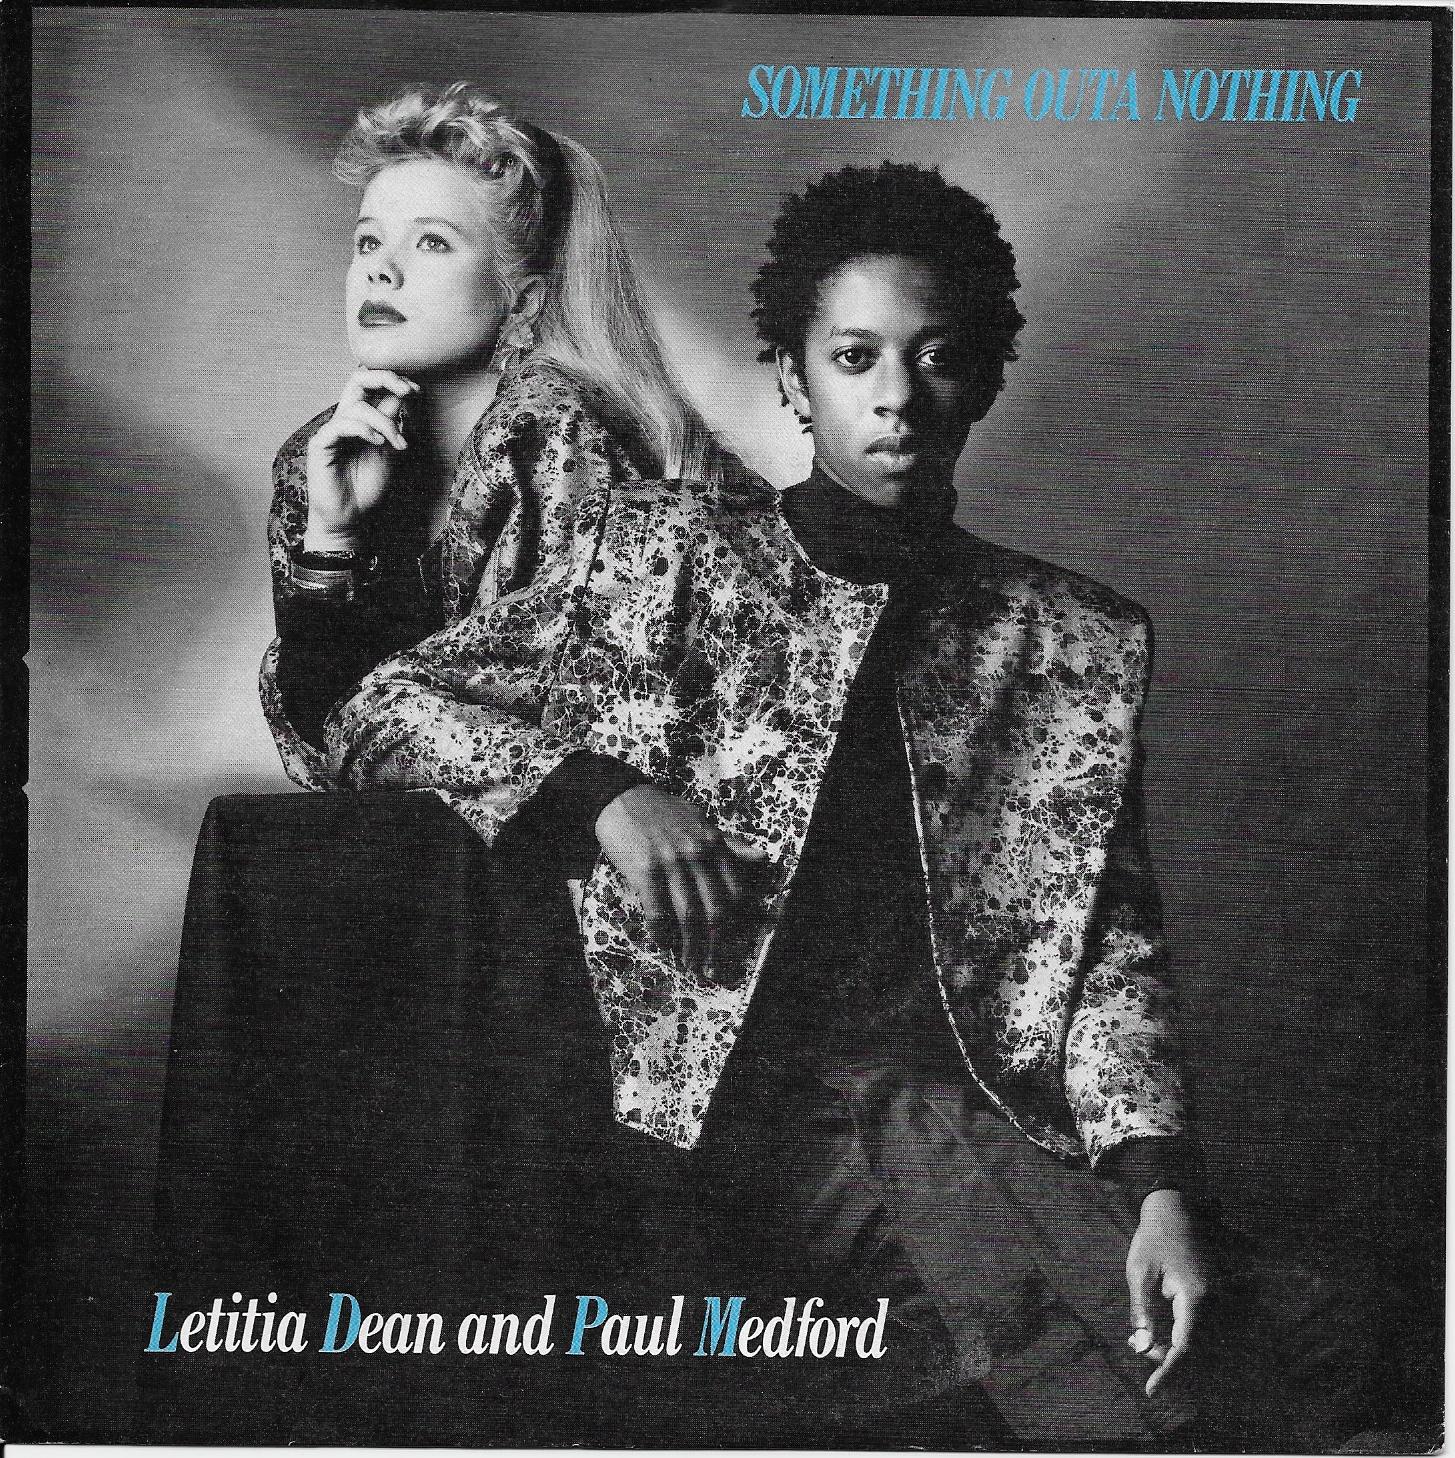 Picture of RESL 203 Something outa nothing (EastEnders) by artist Letitia Dean and Paul Medford from the BBC singles - Records and Tapes library